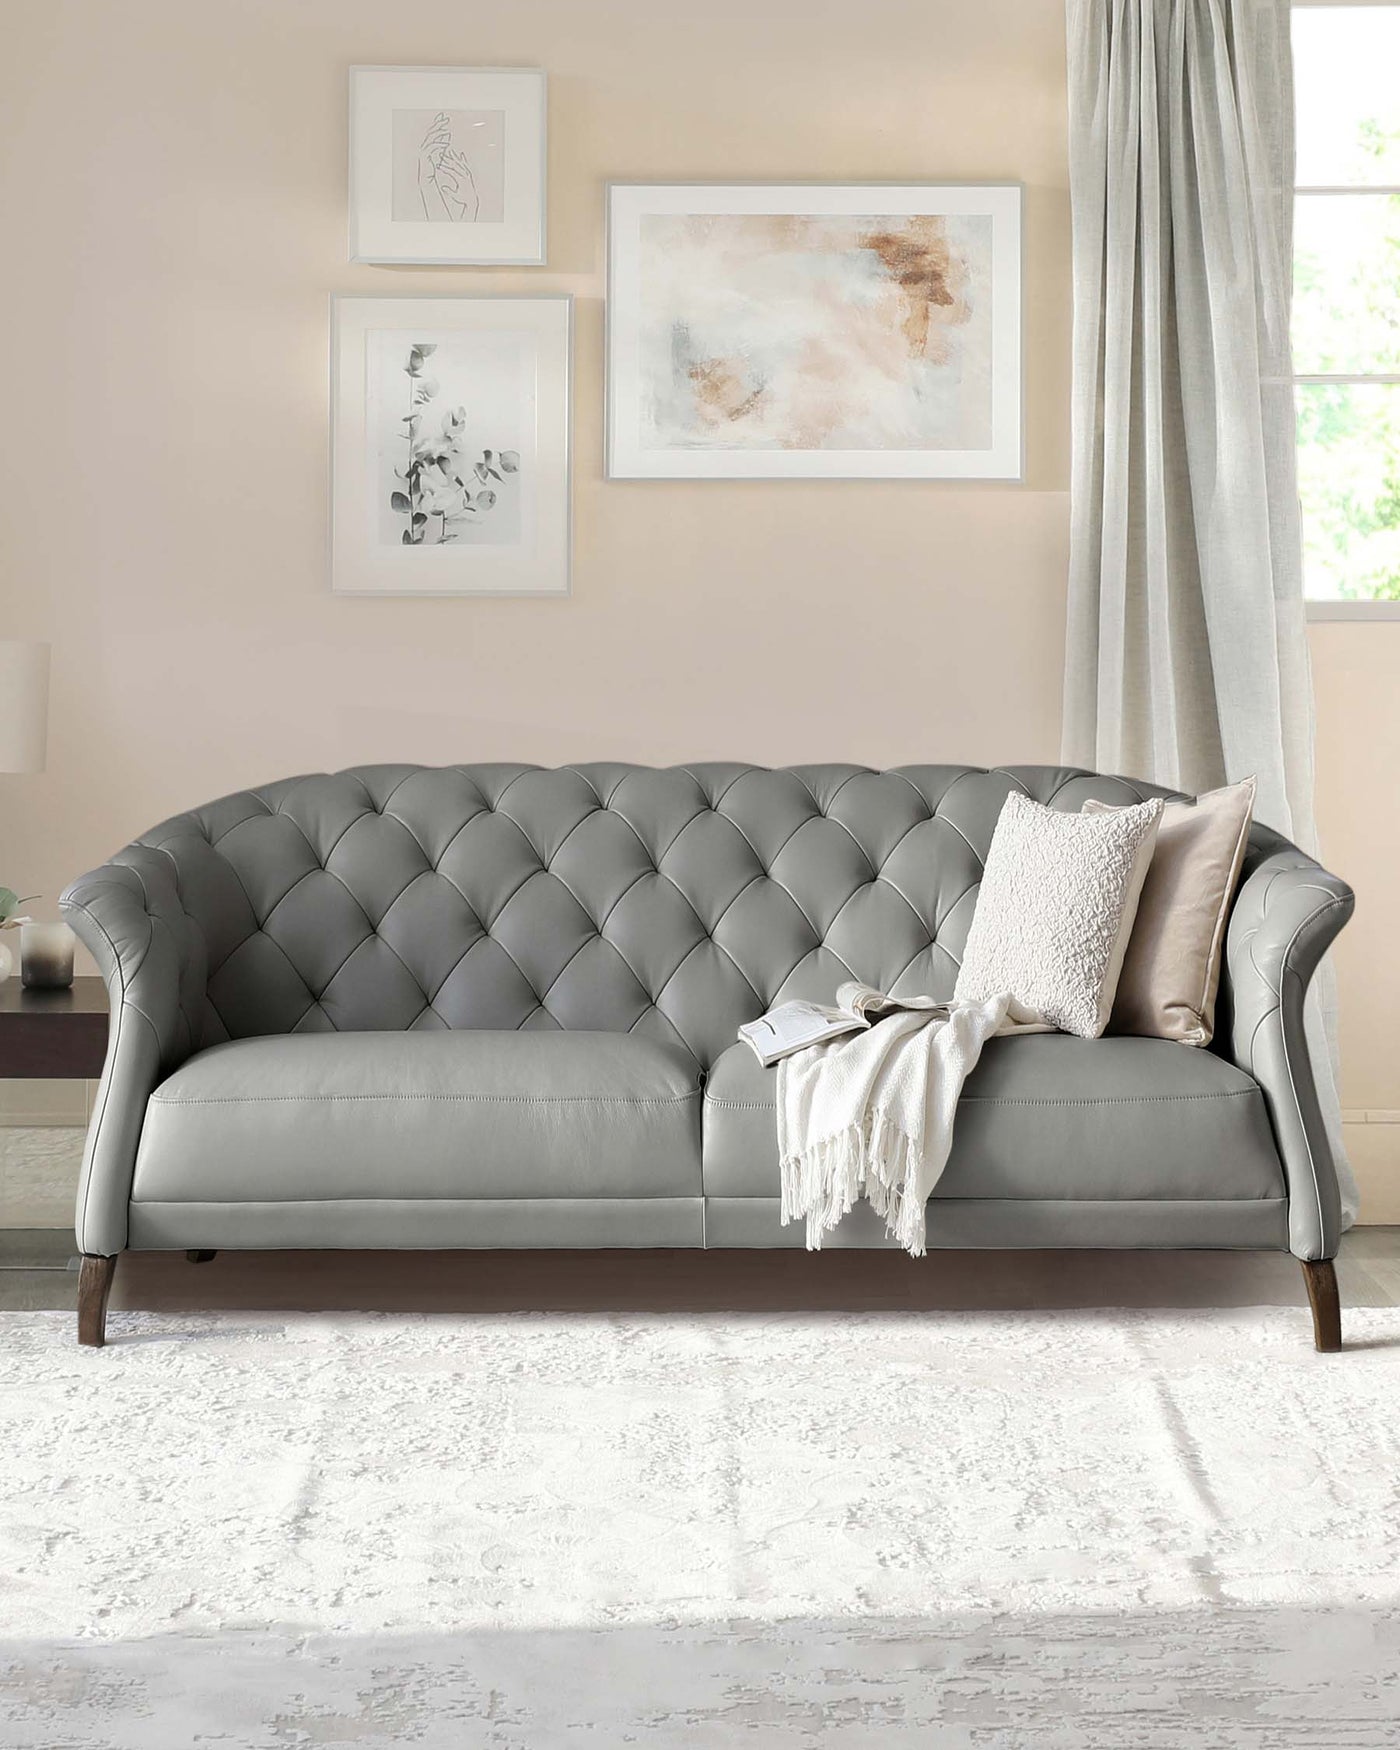 Elegant grey tufted sofa with a curved backrest and armrests, featuring dark wooden legs, accented with a decorative beige throw blanket and a textured cushion. The sofa is set against a light-coloured wall with abstract art, providing a sophisticated and modern aesthetic.